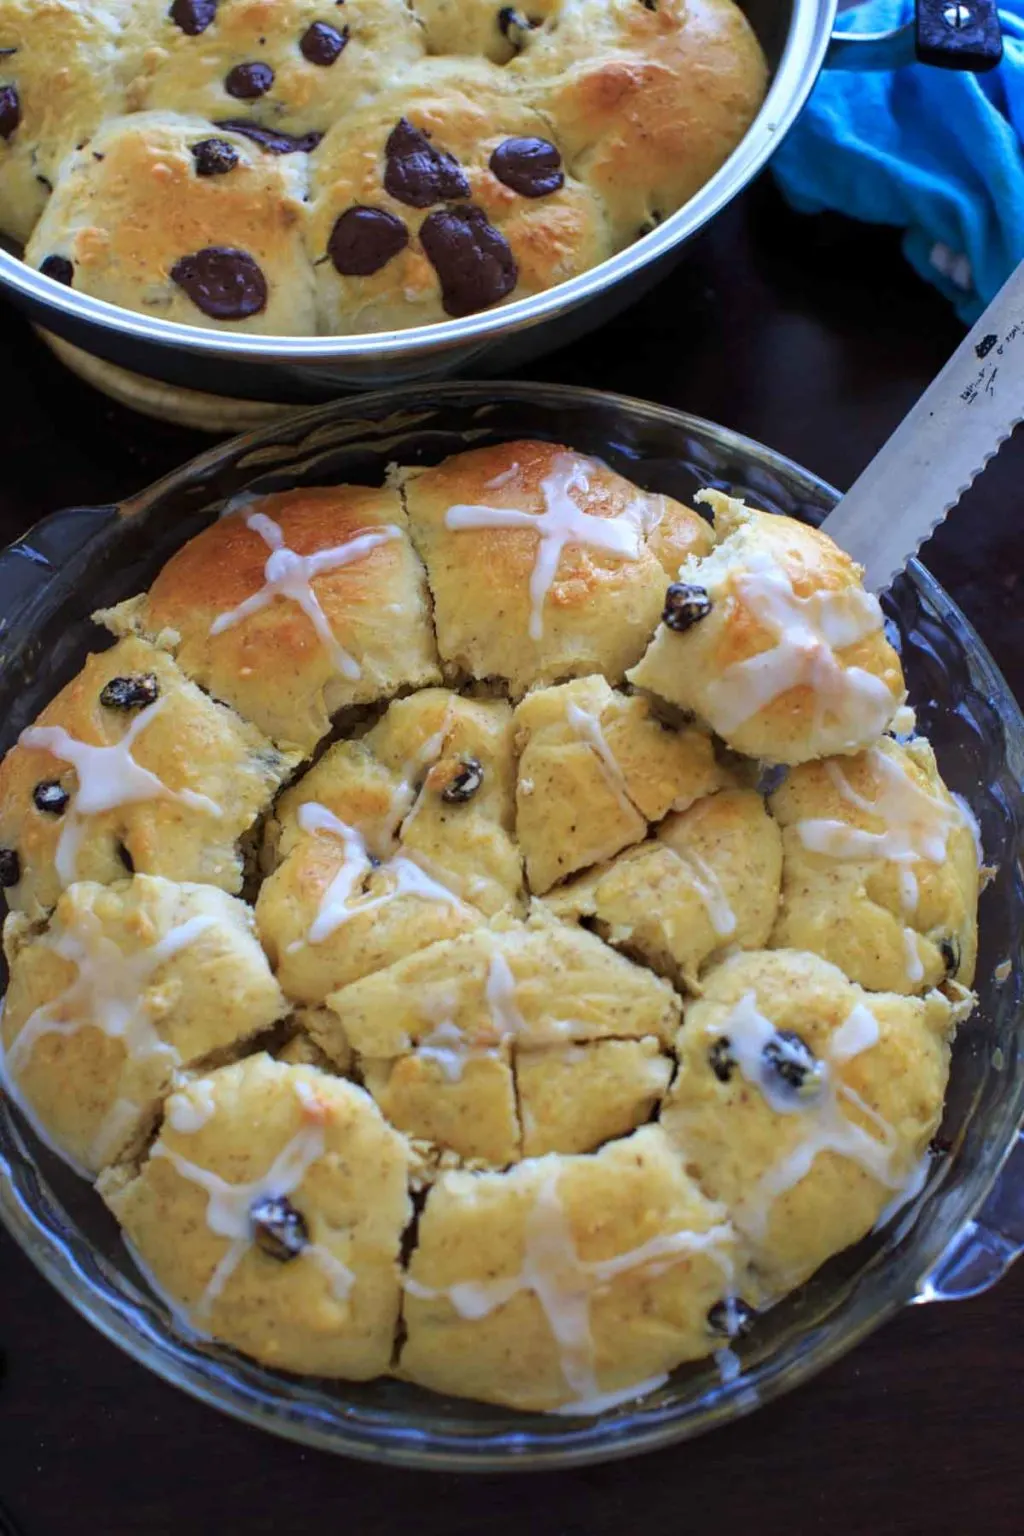 Hot Cross Buns with the options for added dark chocolate pieces and raisins and/or dried cherries. Makes two dozen.